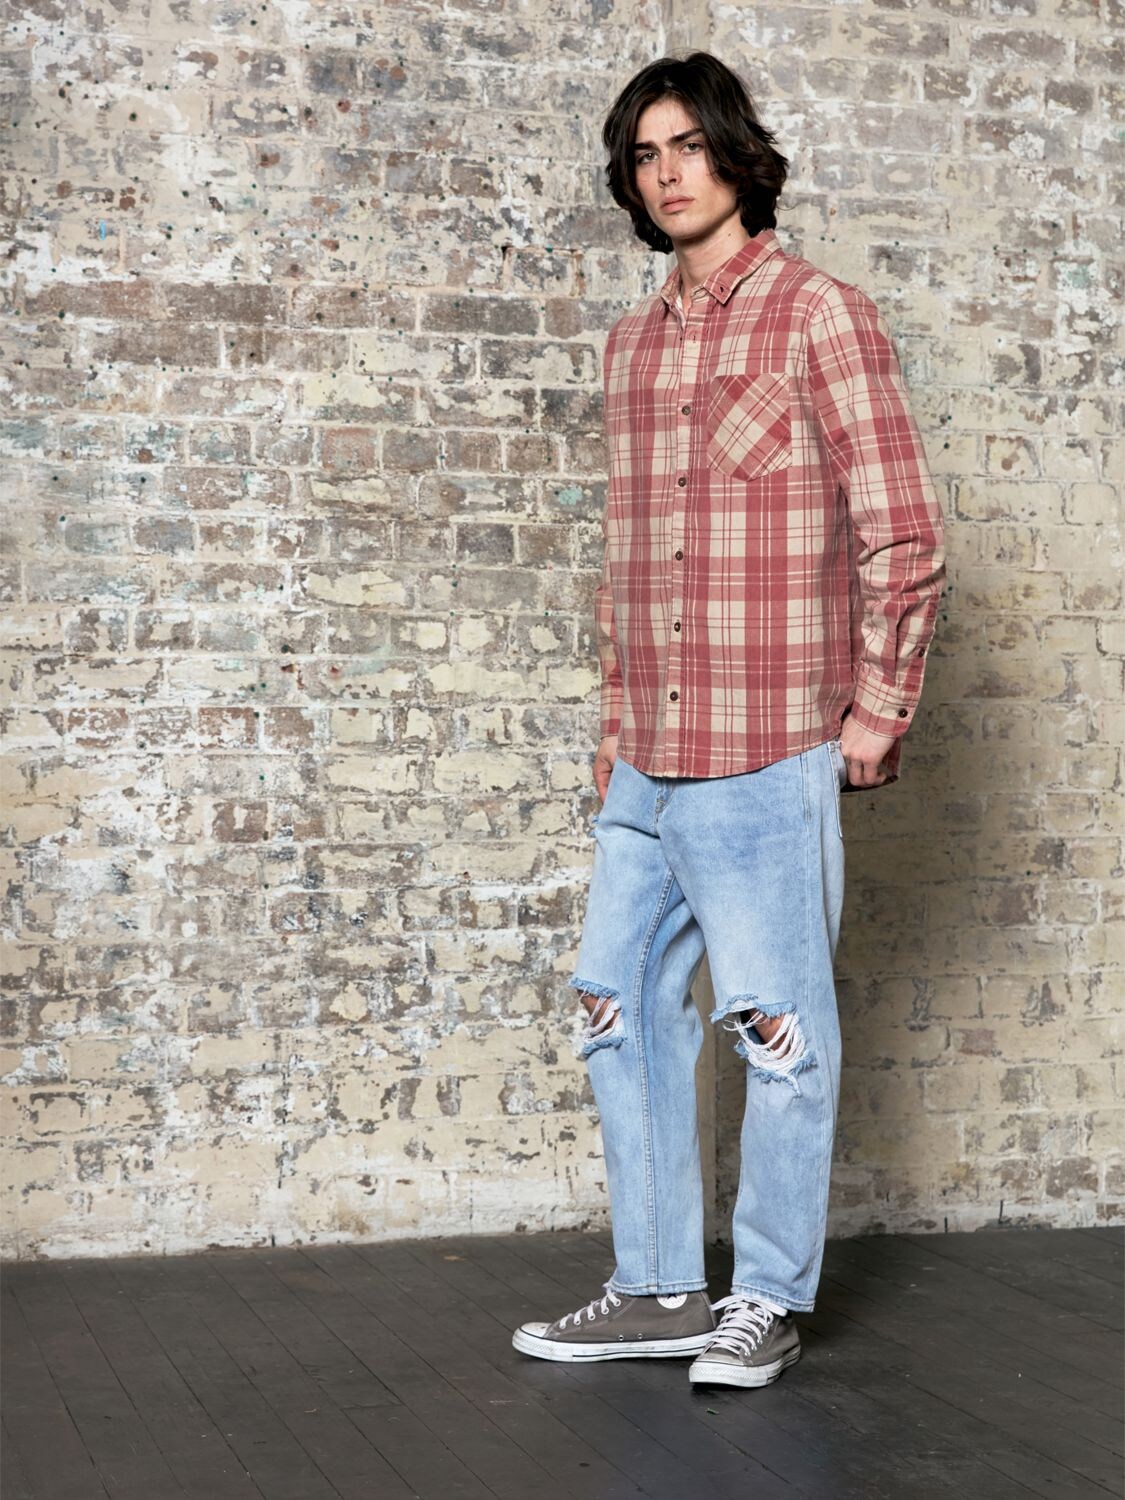 The People Vs Check Cotton Shirt In Red,beige,white